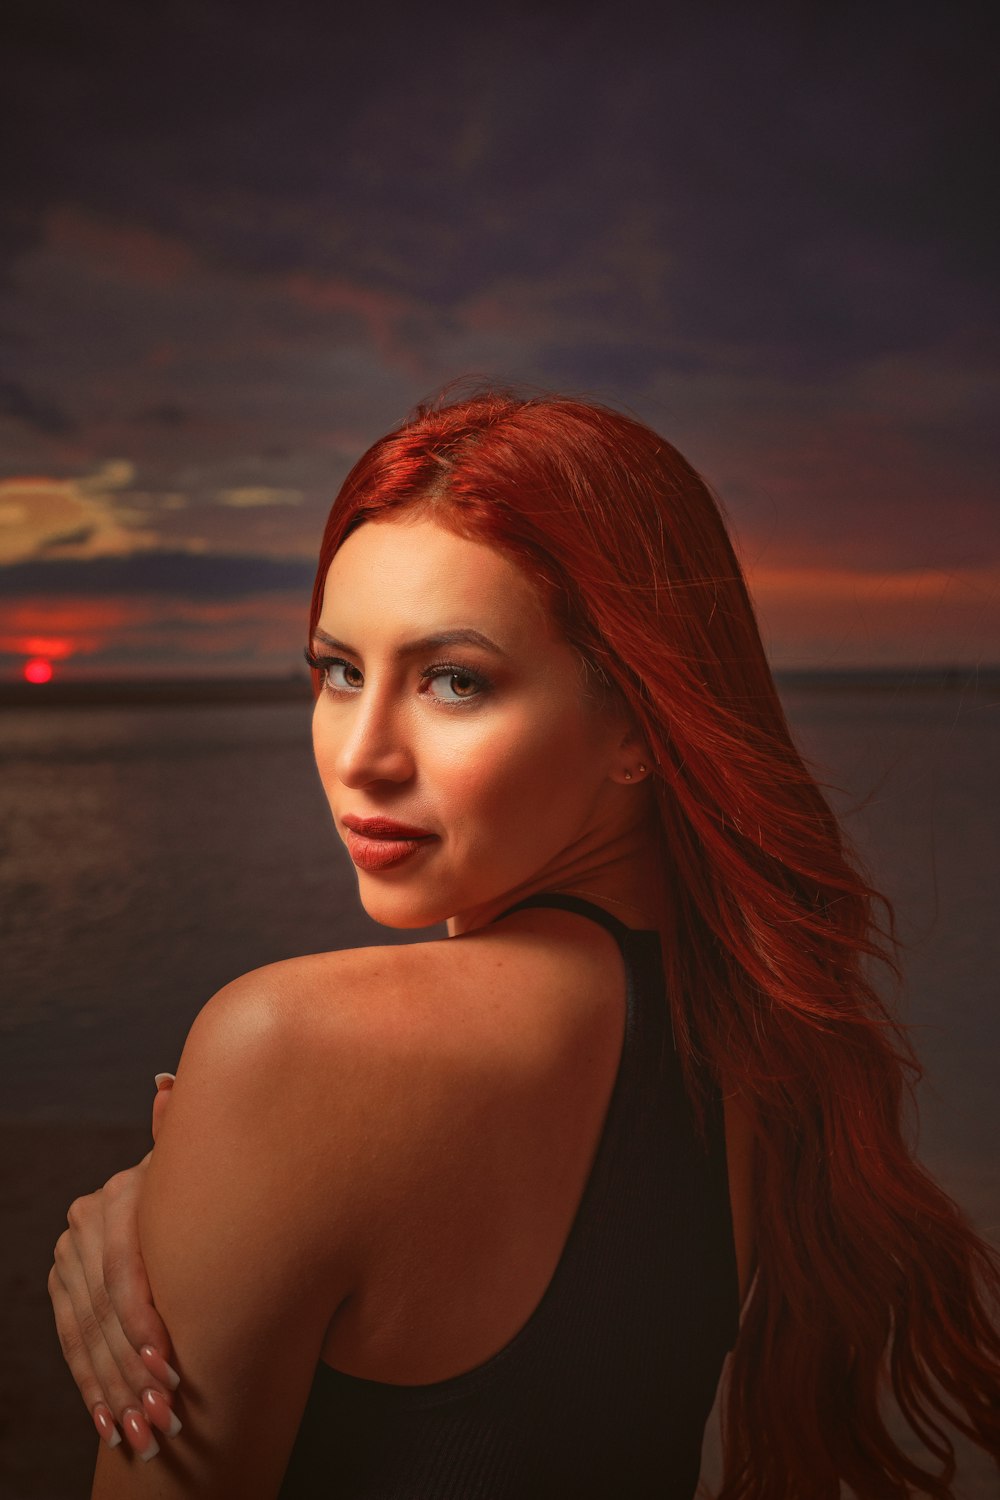 a woman with red hair standing on a beach